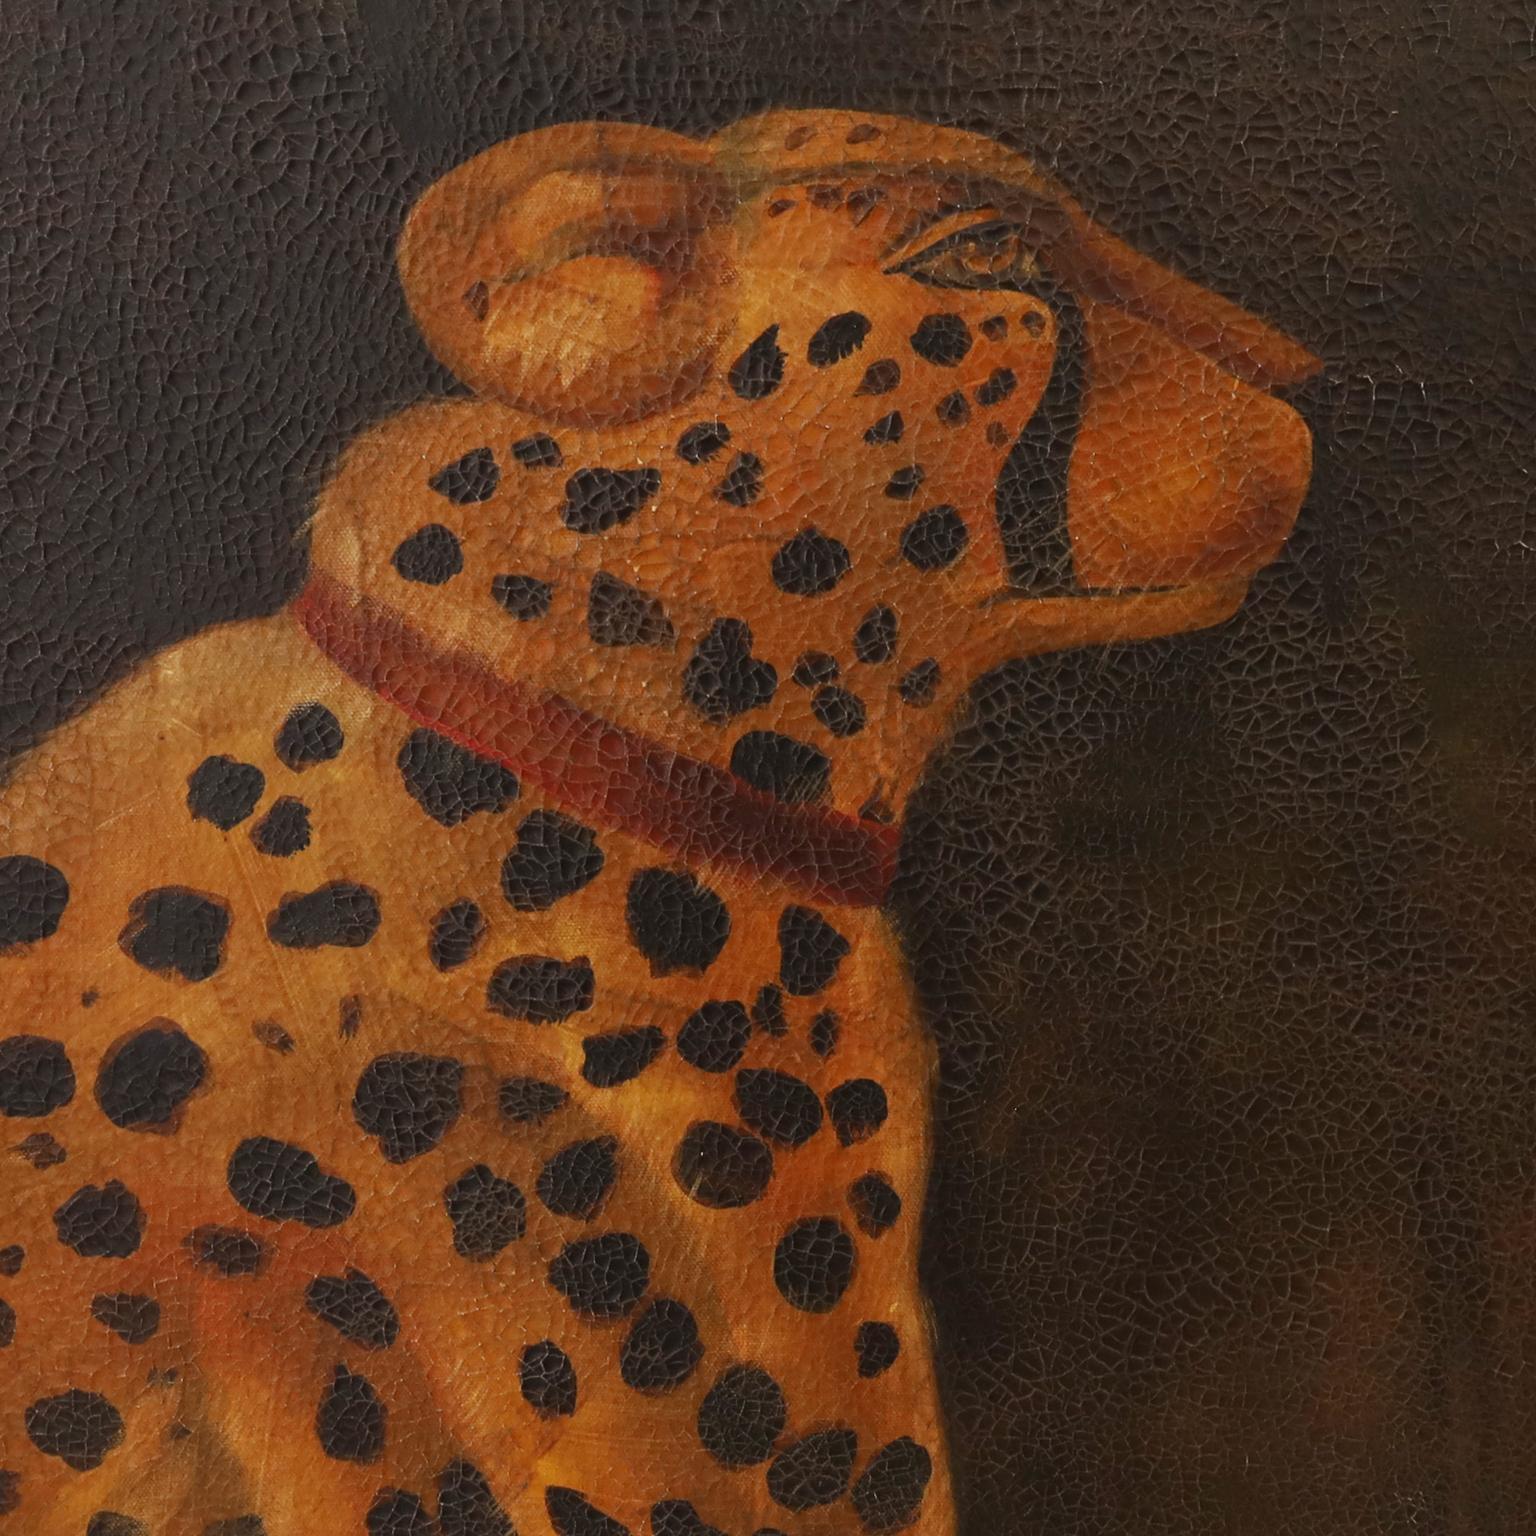 Reginald Baxter Vintage Oil Painting on Canvas of a Cheetah or Leopard 2